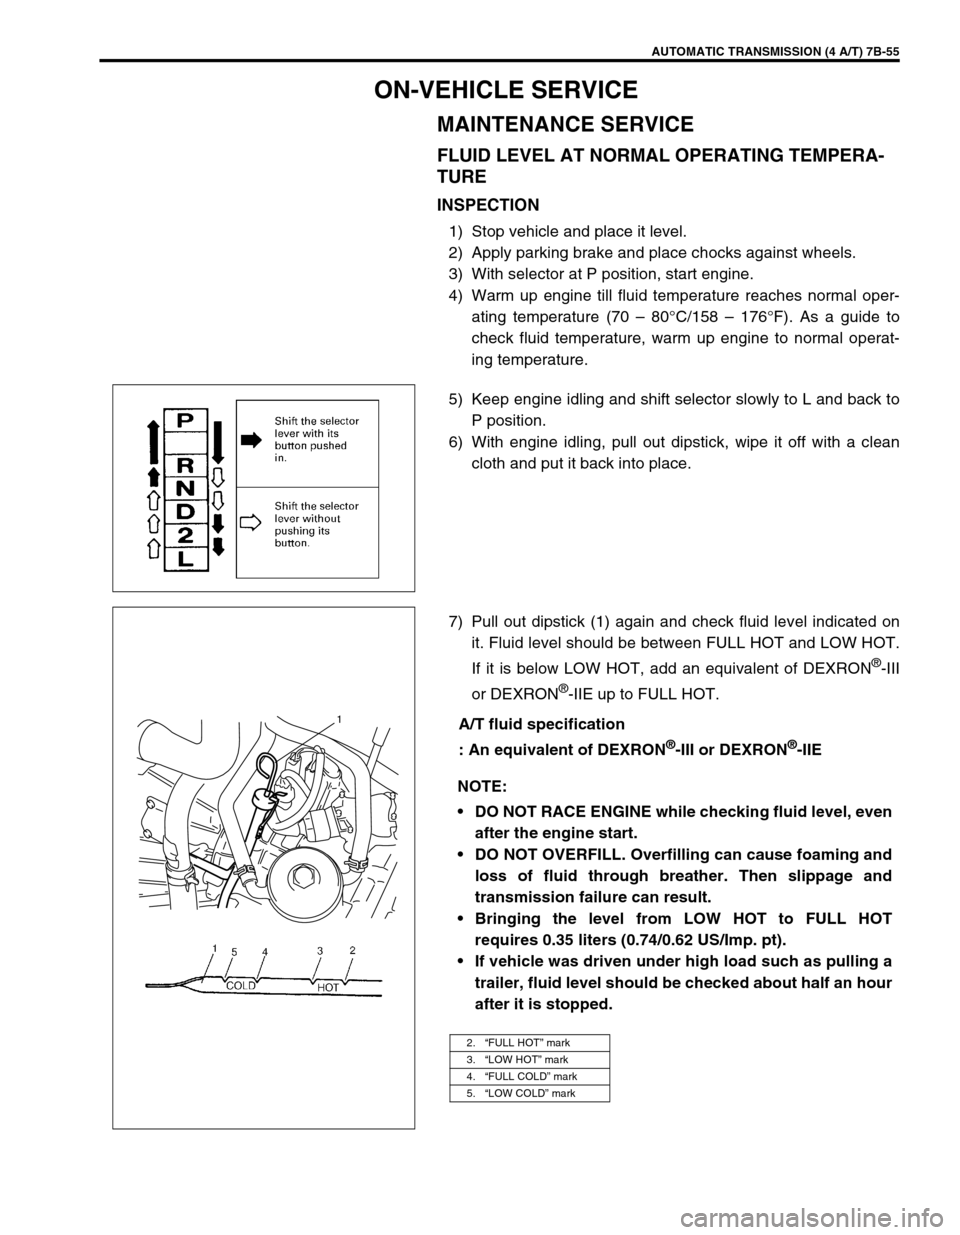 SUZUKI SWIFT 2000 1.G Transmission Service Workshop Manual AUTOMATIC TRANSMISSION (4 A/T) 7B-55
ON-VEHICLE SERVICE
MAINTENANCE SERVICE
FLUID LEVEL AT NORMAL OPERATING TEMPERA-
TURE
INSPECTION
1) Stop vehicle and place it level.
2) Apply parking brake and plac